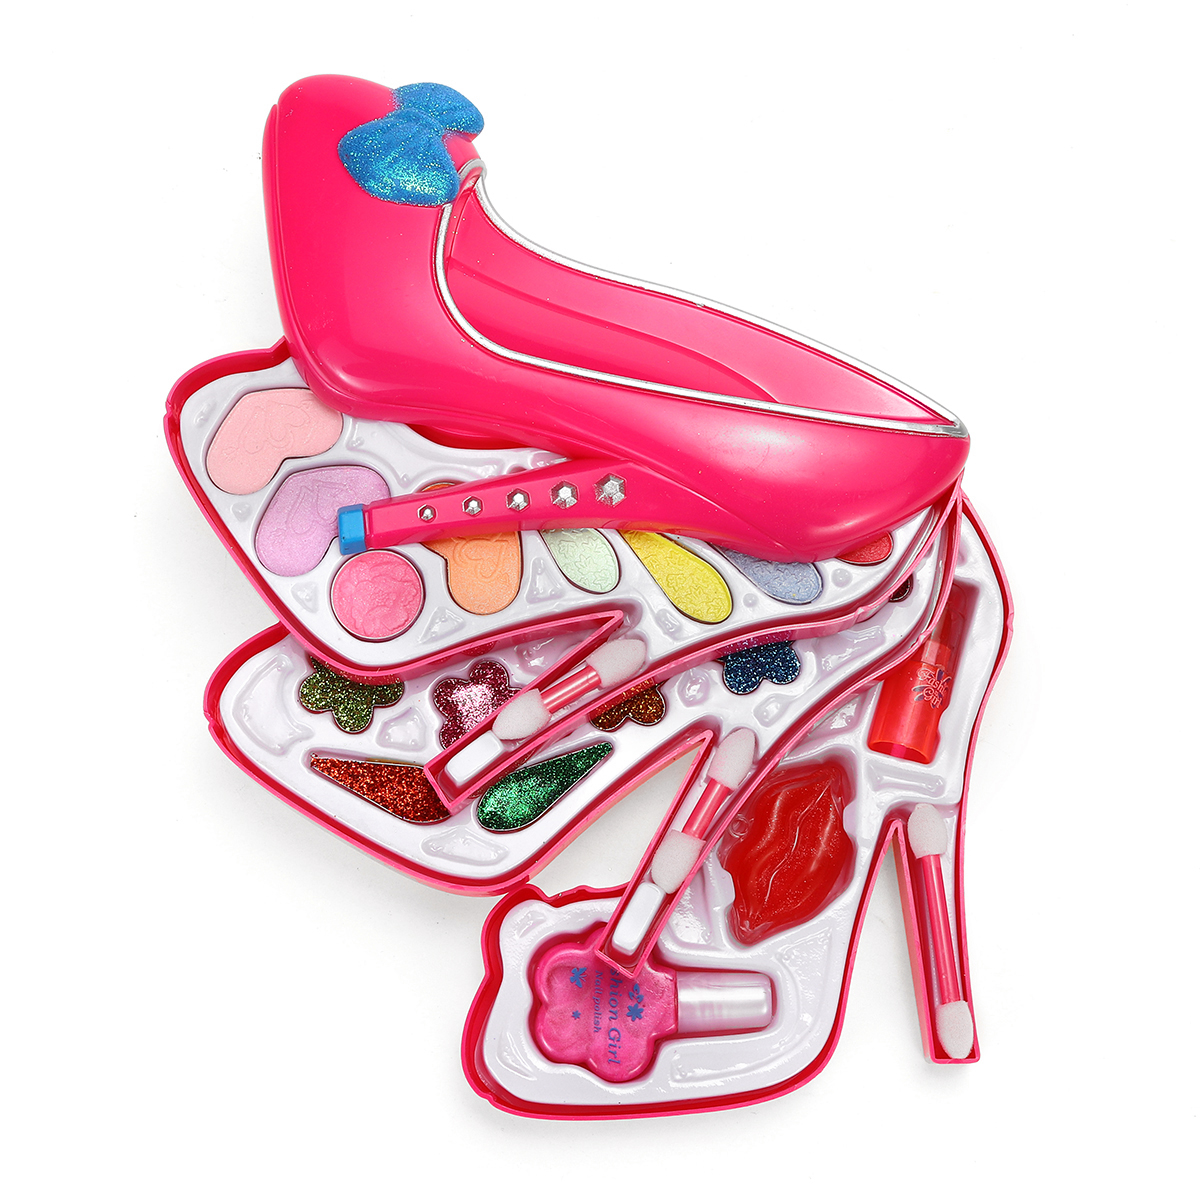 Kids-Girl-Makeup-Toy-Set-Non-Toxic-Cosmetic-High-Heel-Shape-Play-Kits-Children-Gift-for-Over-7-Years-1829485-10